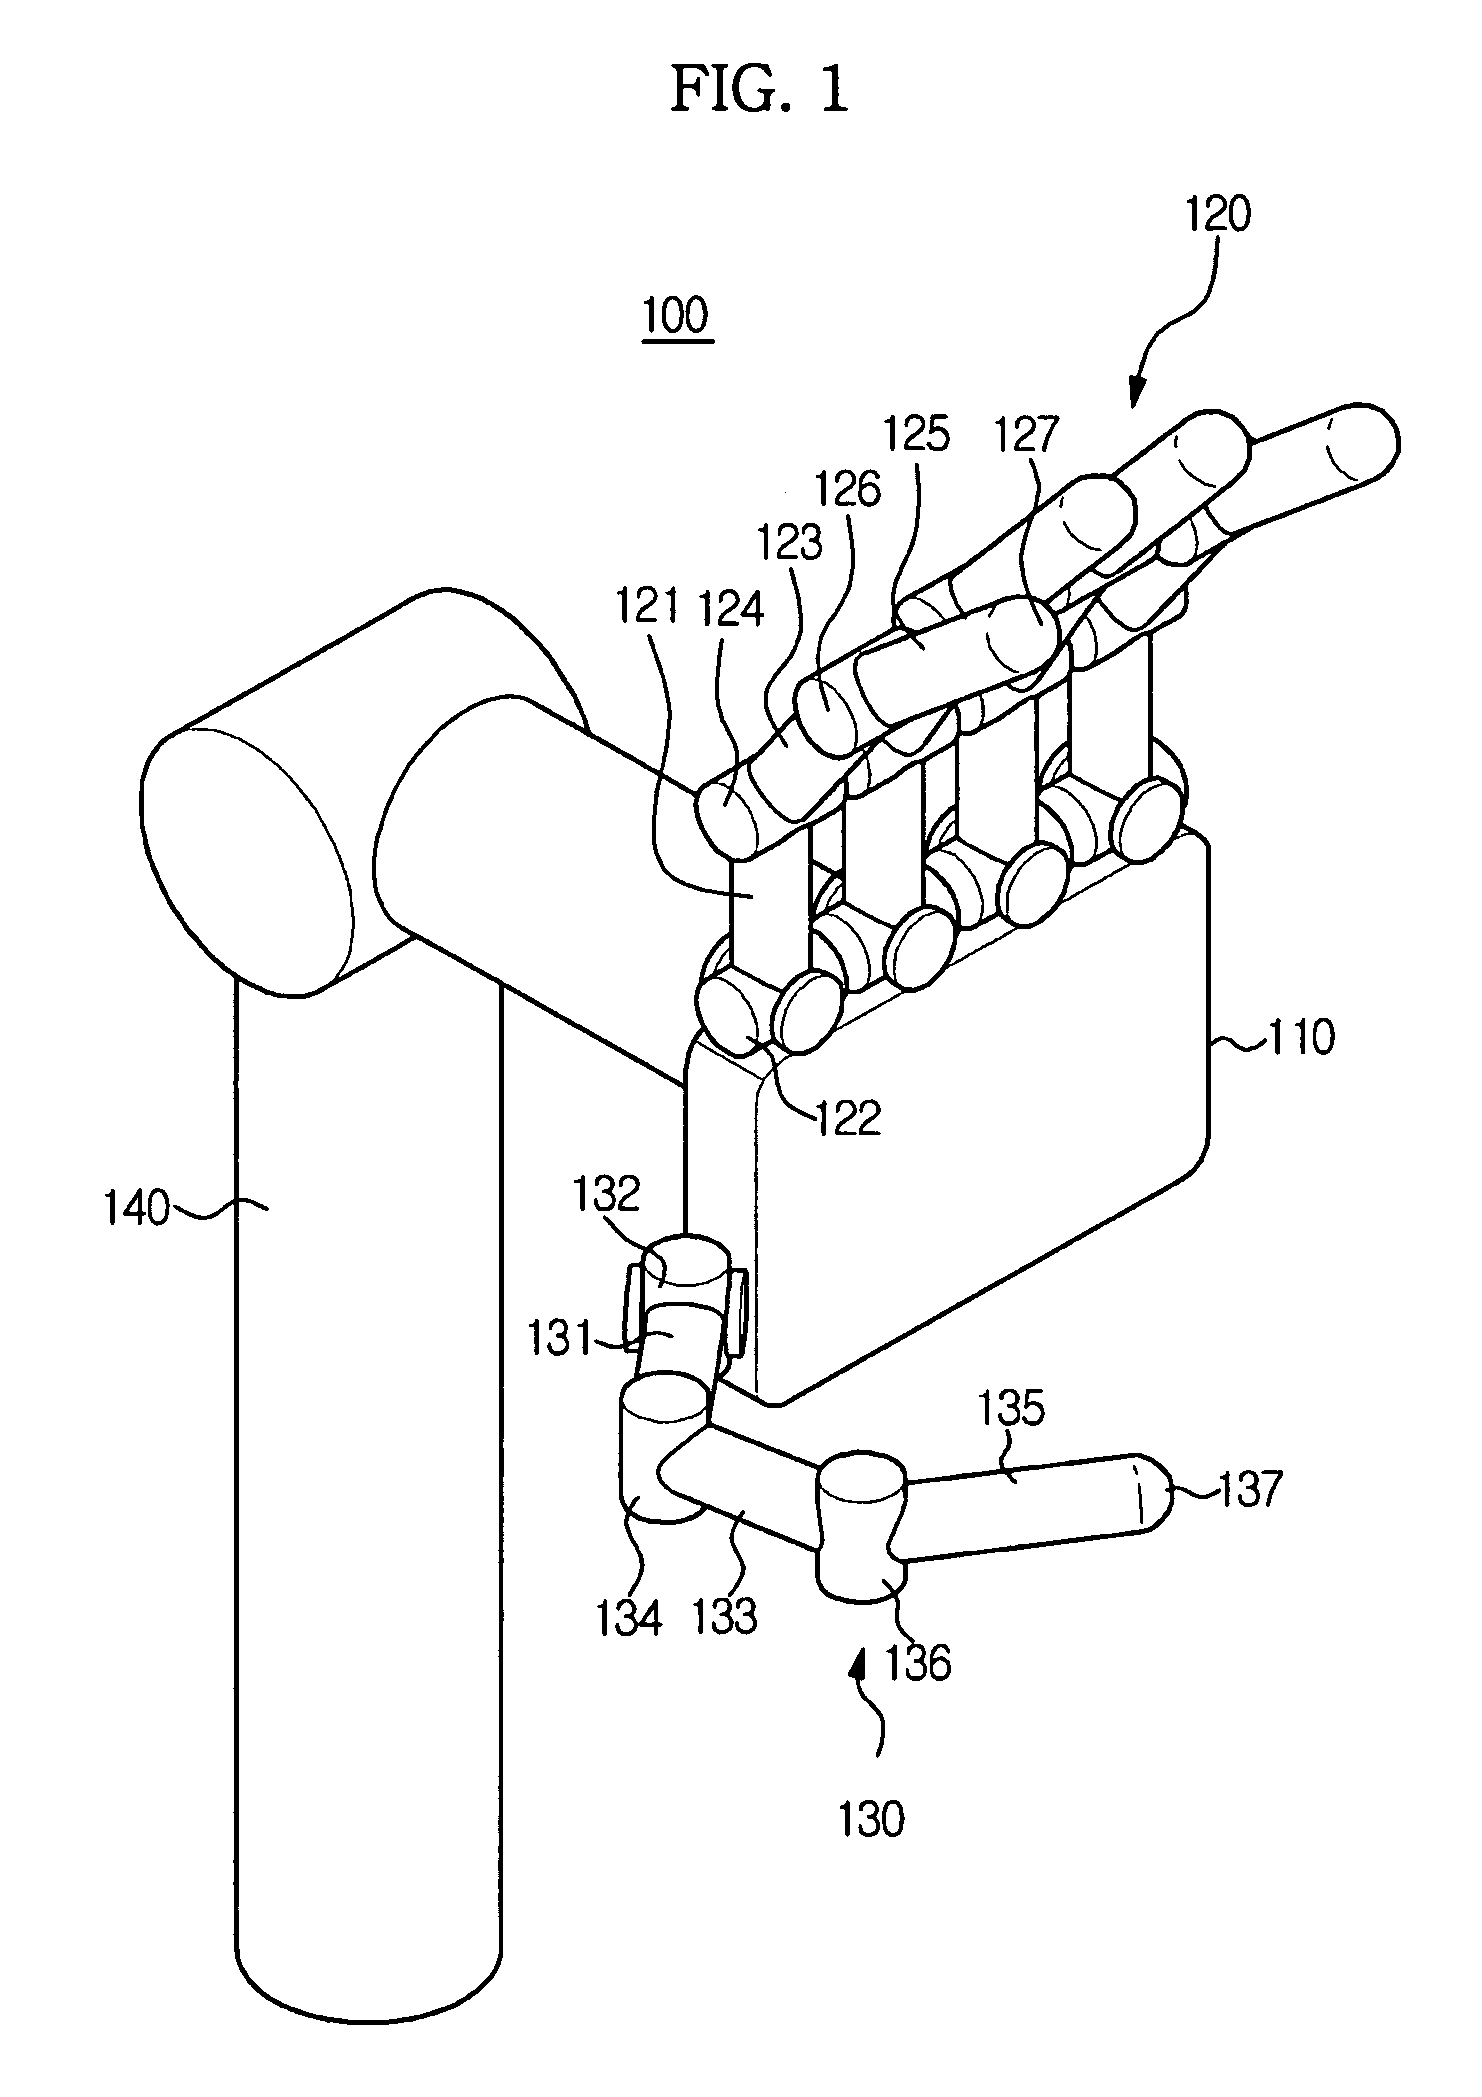 Robot hand and method of controlling the same